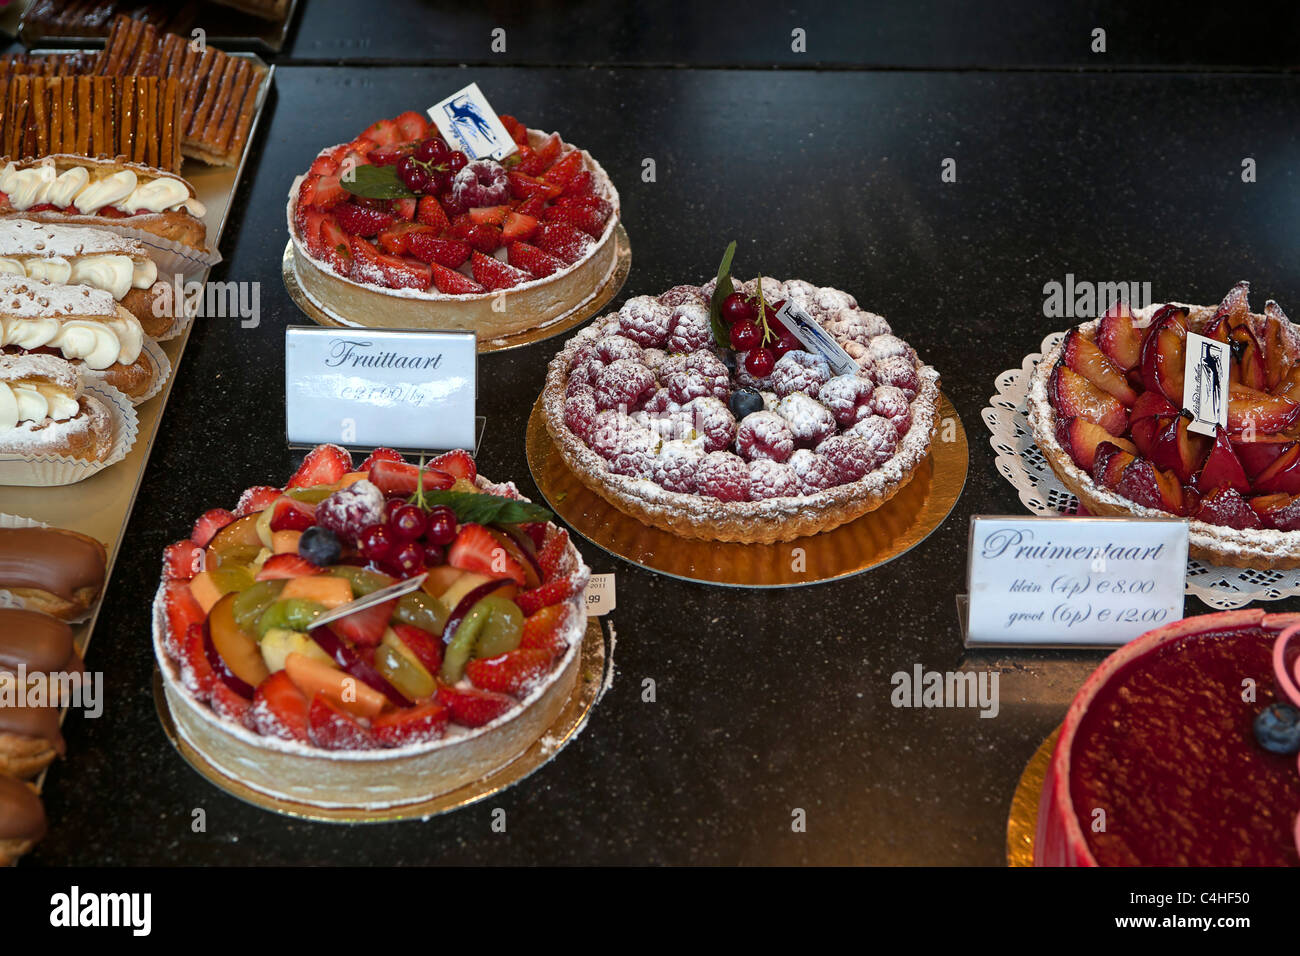 Display of fruit tarts and pastries in the window of a tea room in Bruges, Belgium Stock Photo